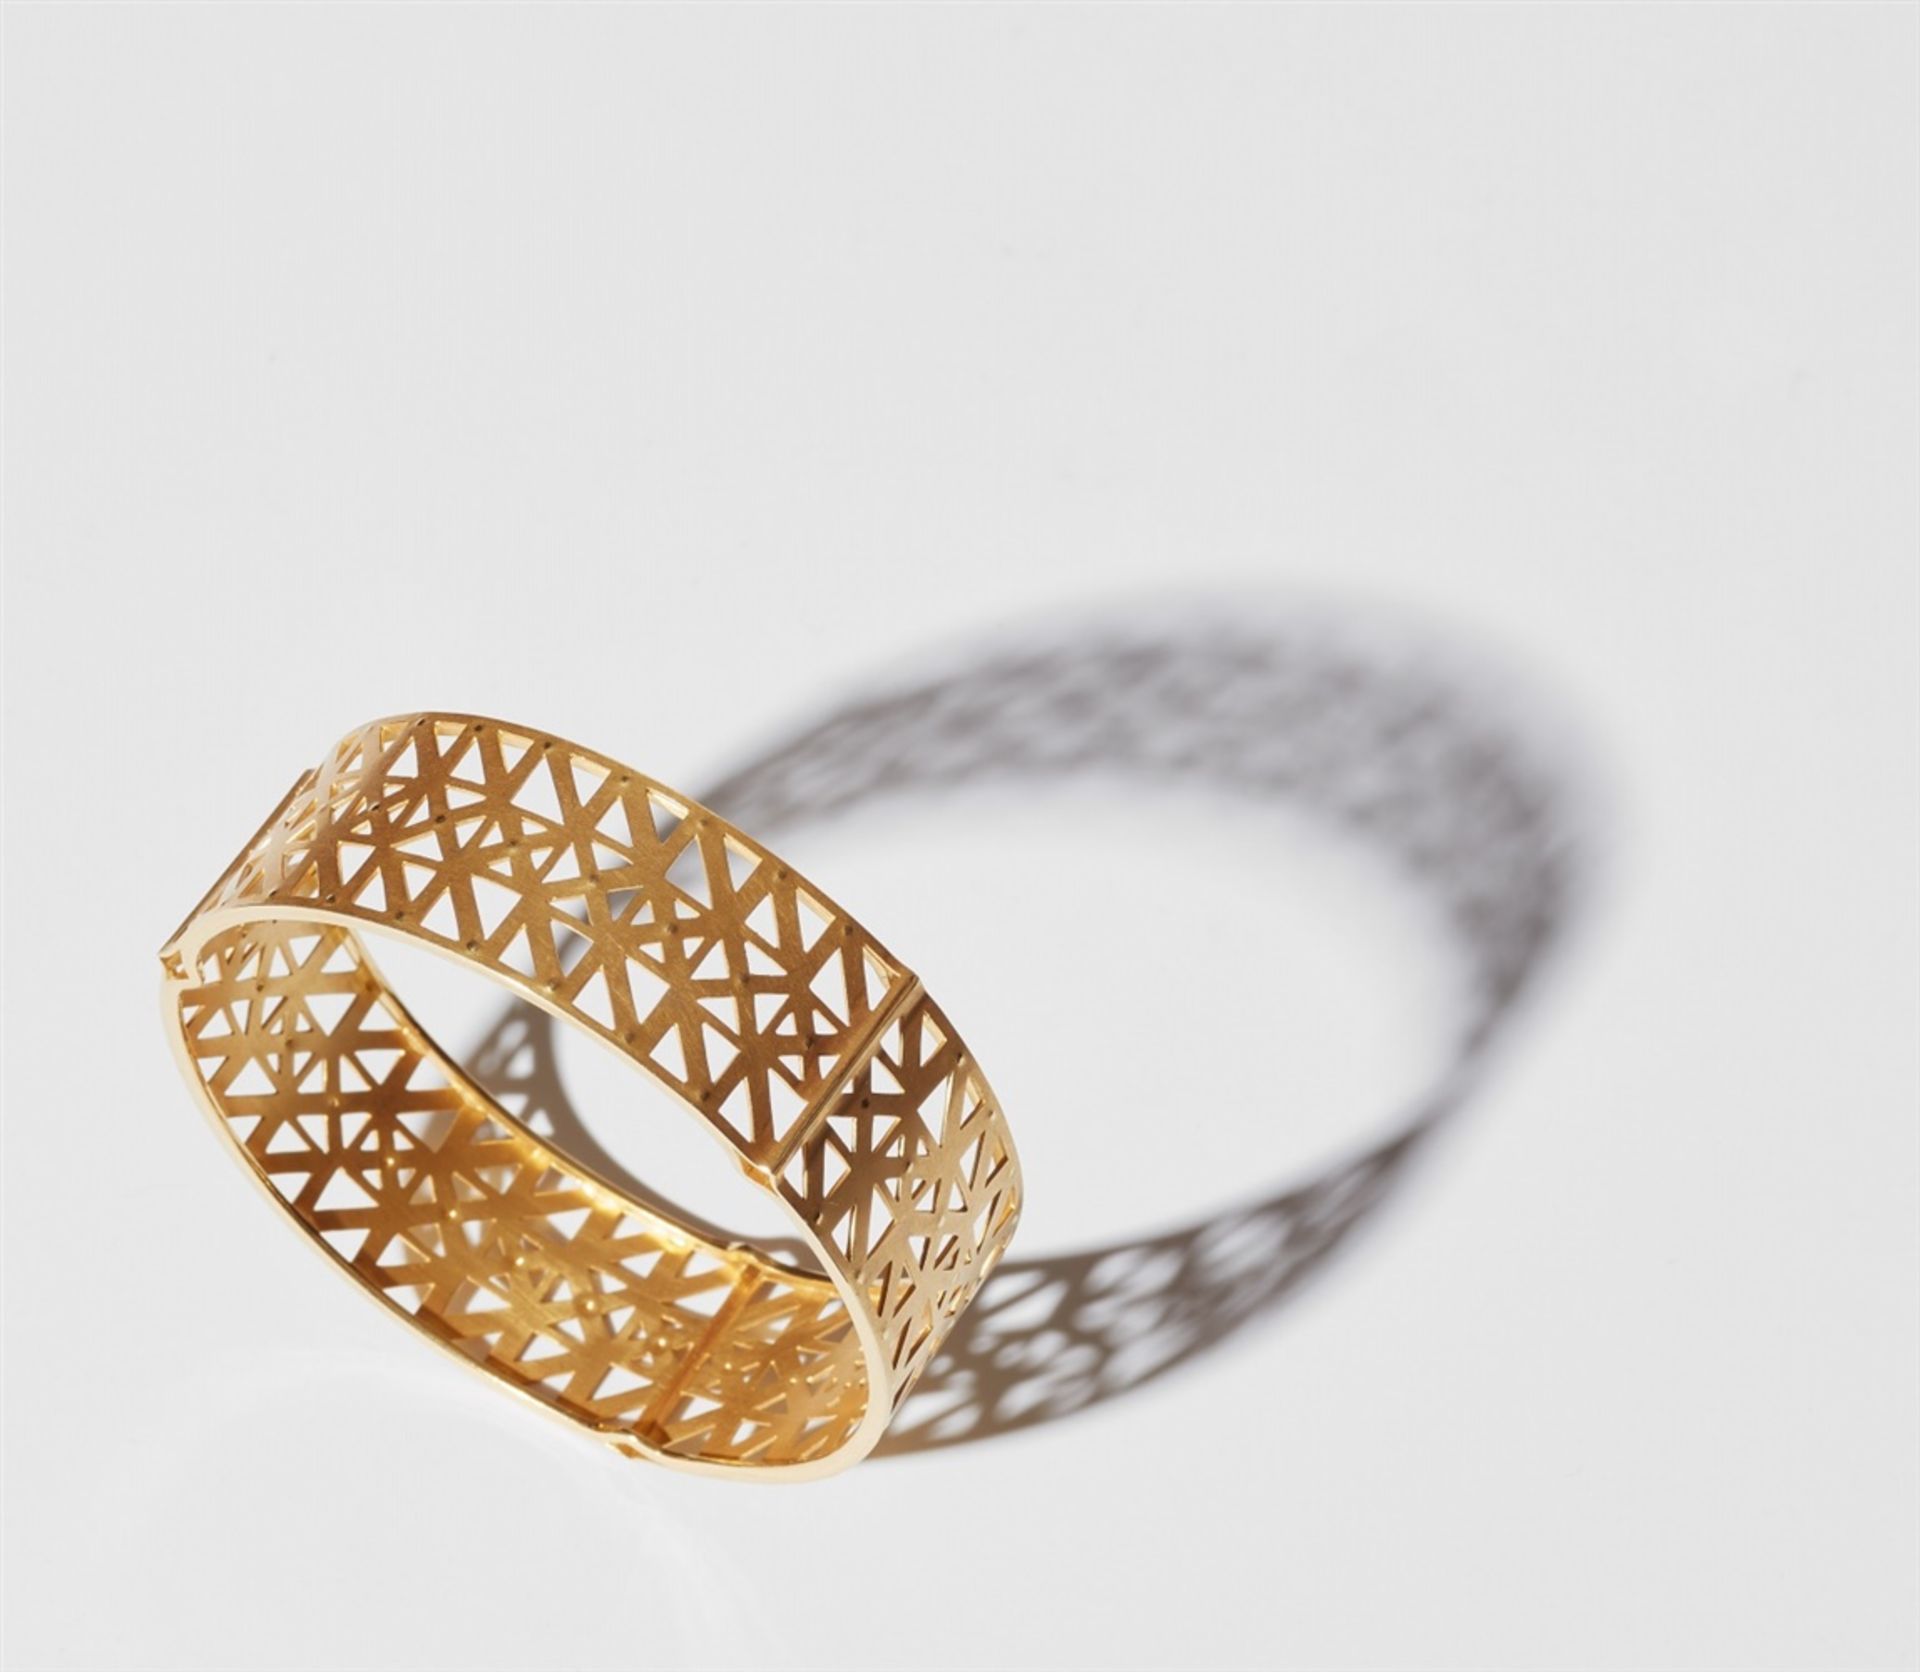 An 18k gold bangleDesigned as a gold band with fine pierced geometric decor and embossing. W 2 cm. - Bild 2 aus 3